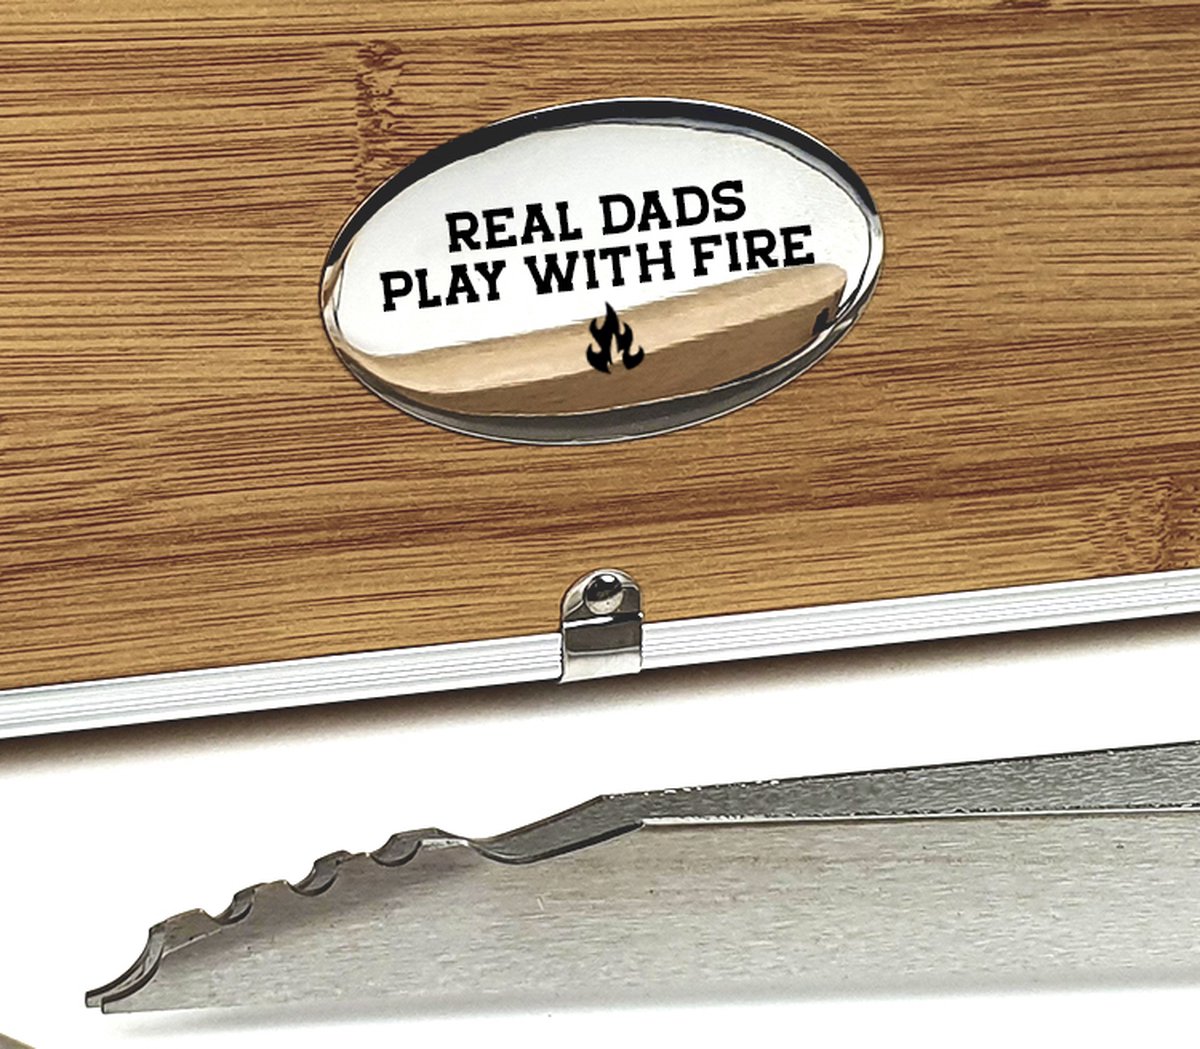 BBQ set - Cadeau papa - Vaderdag cadeau - real dads play with fire